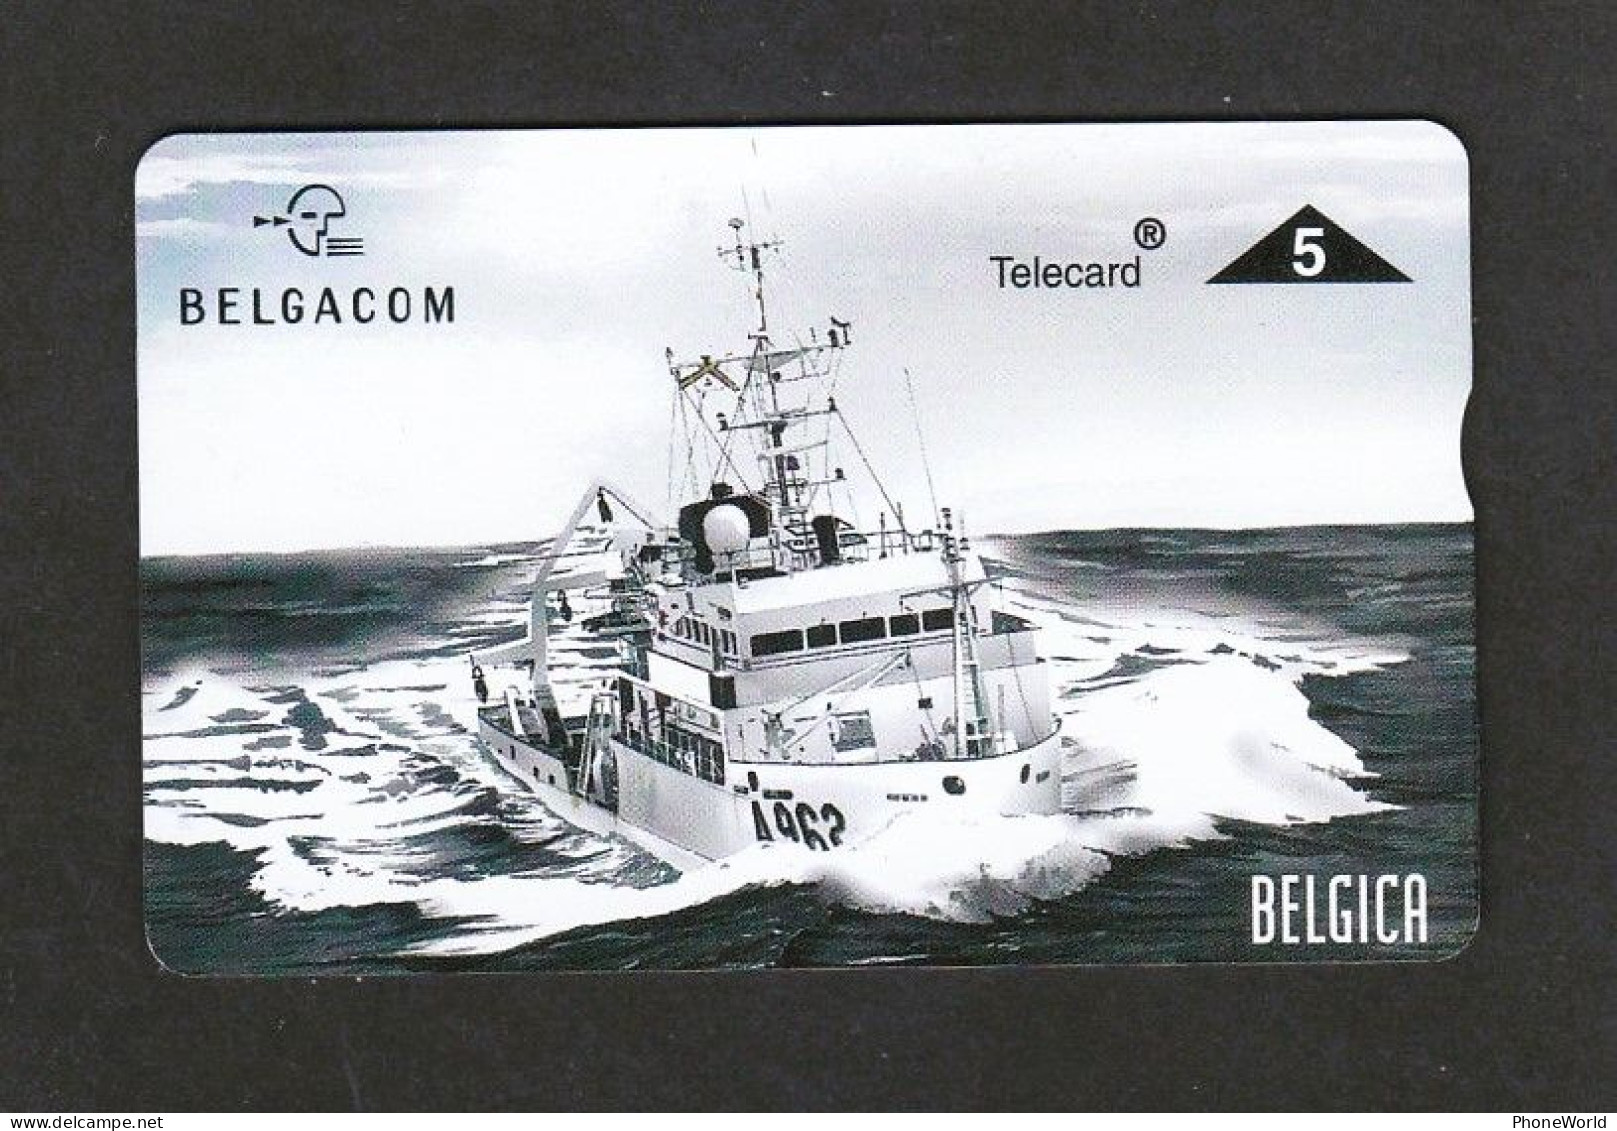 P551 - Belgica 2 - 706 L Mint - Ship - Army - Without Chip